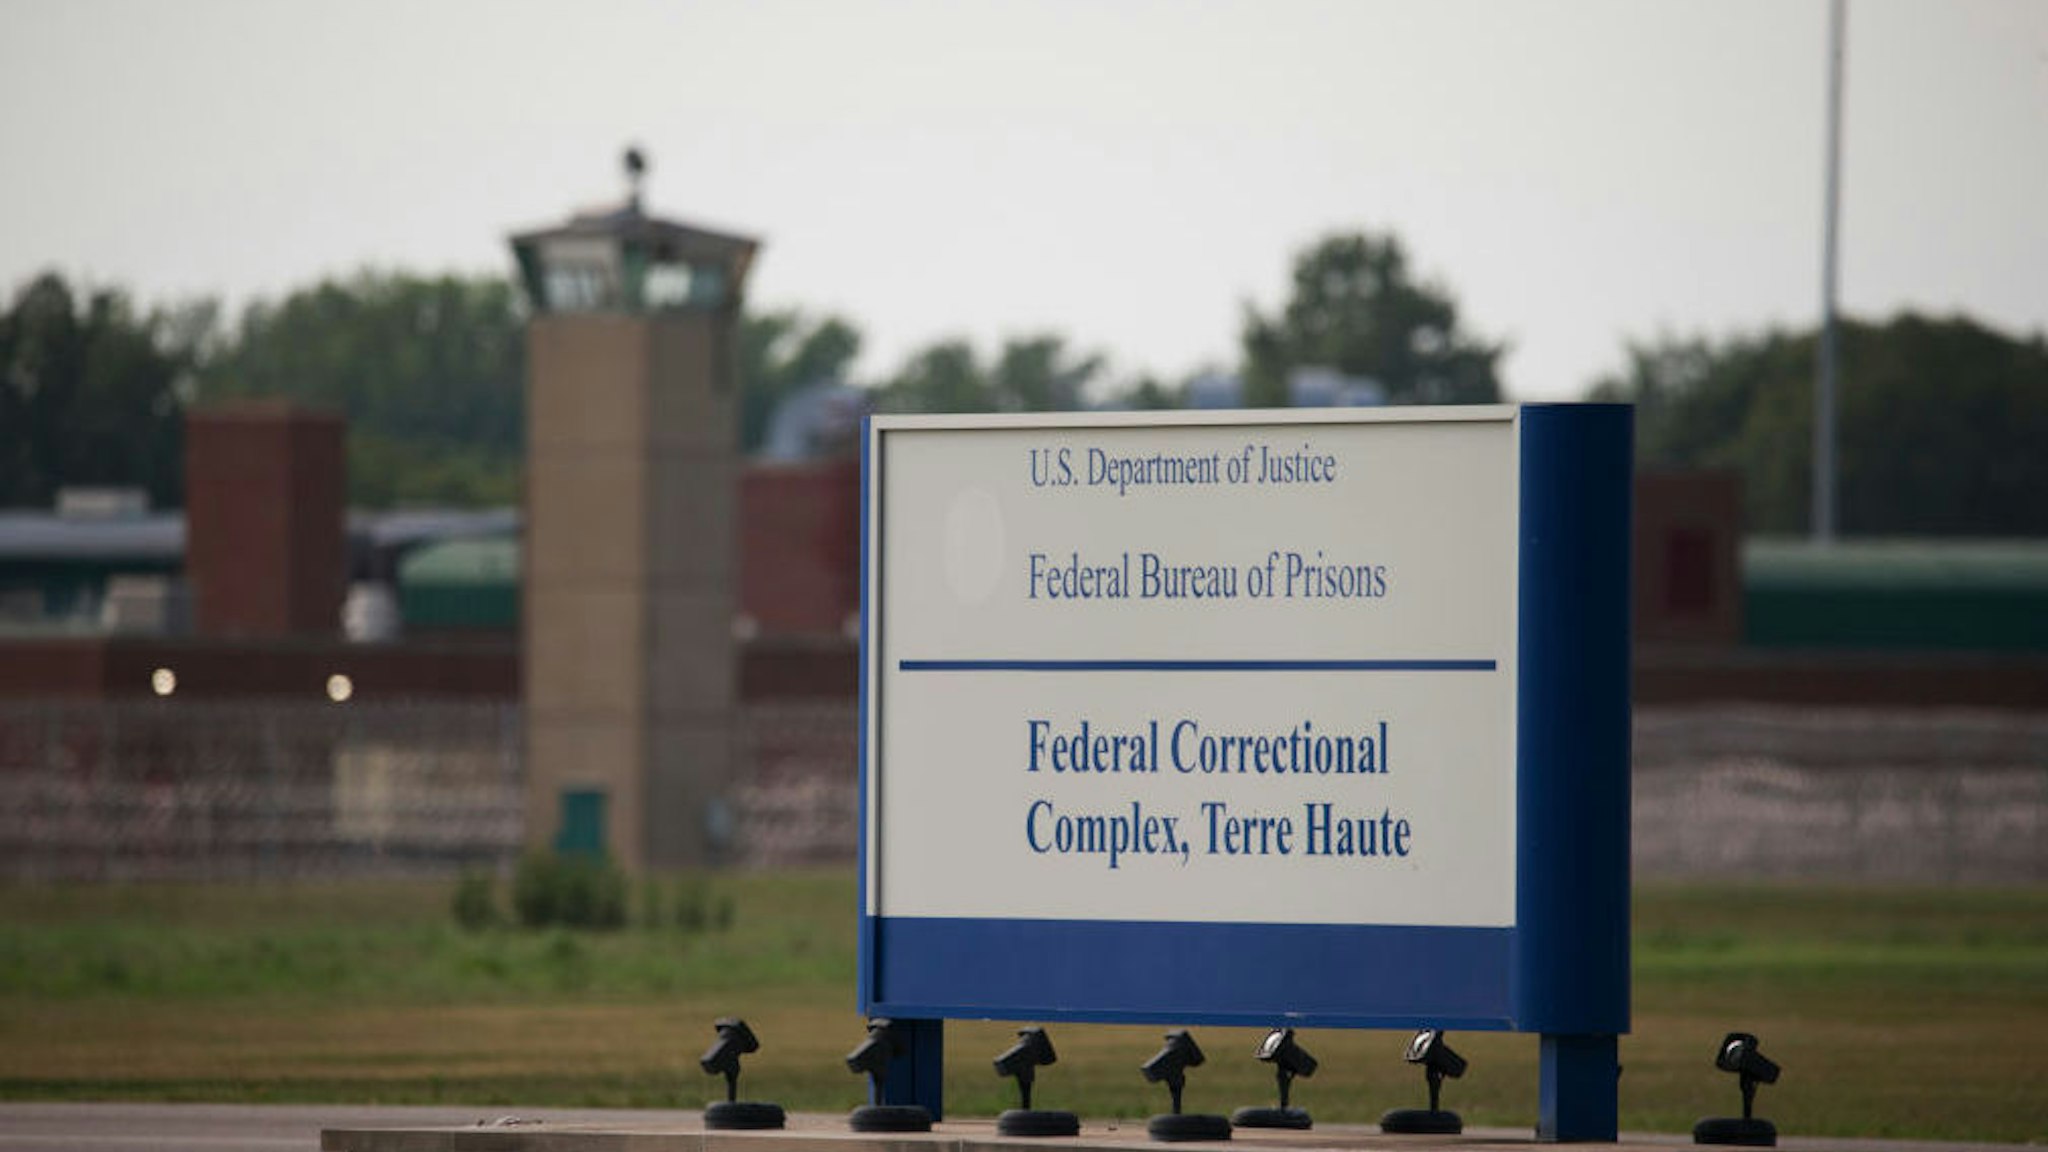 TERRE HAUTE, INDIANA, UNITED STATES - 2020/07/15: View of a sign outside the Terre Haute Federal Correctional Complex where death row inmate Wesley Ira Purkey was scheduled to be executed by lethal injection. Purkey's execution scheduled for 7 p.m., was delayed by a judge. Purkey suffers from Dementia, and Alzheimer's disease. Wesley Ira Purkey was convicted of a gruesome 1998 kidnapping and killing. (